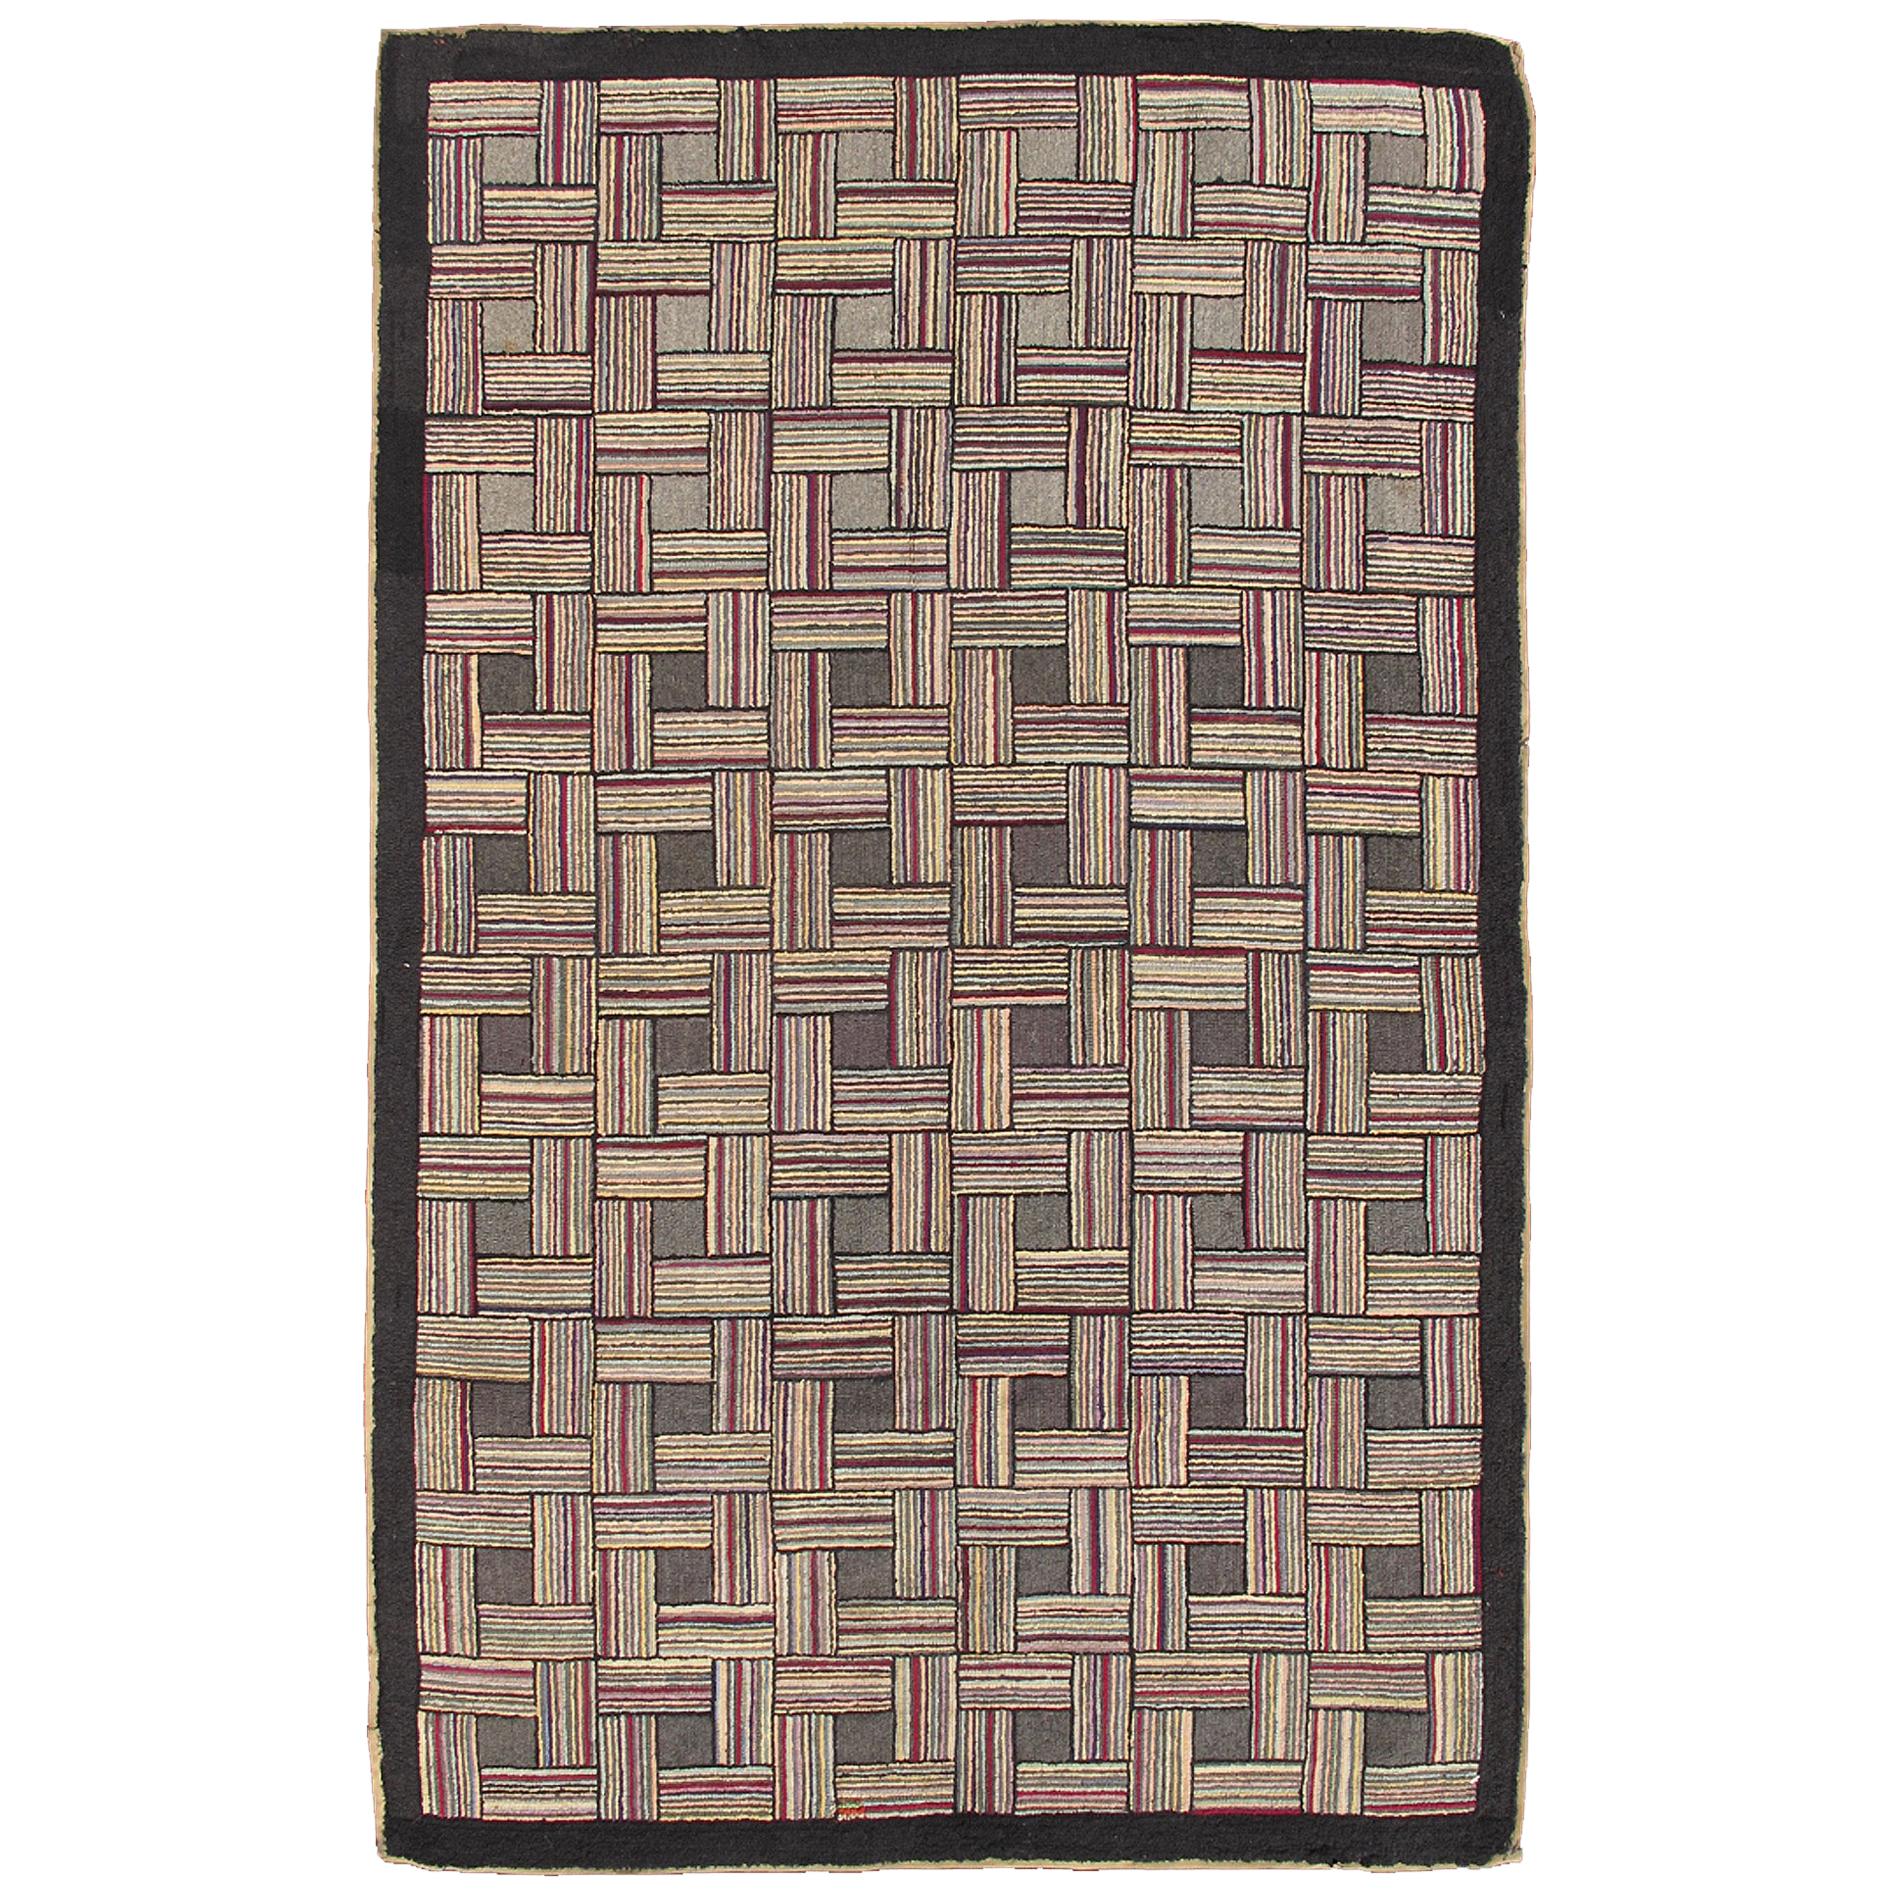 Checkerboard Antique American Hooked Rug with Geometric Designs